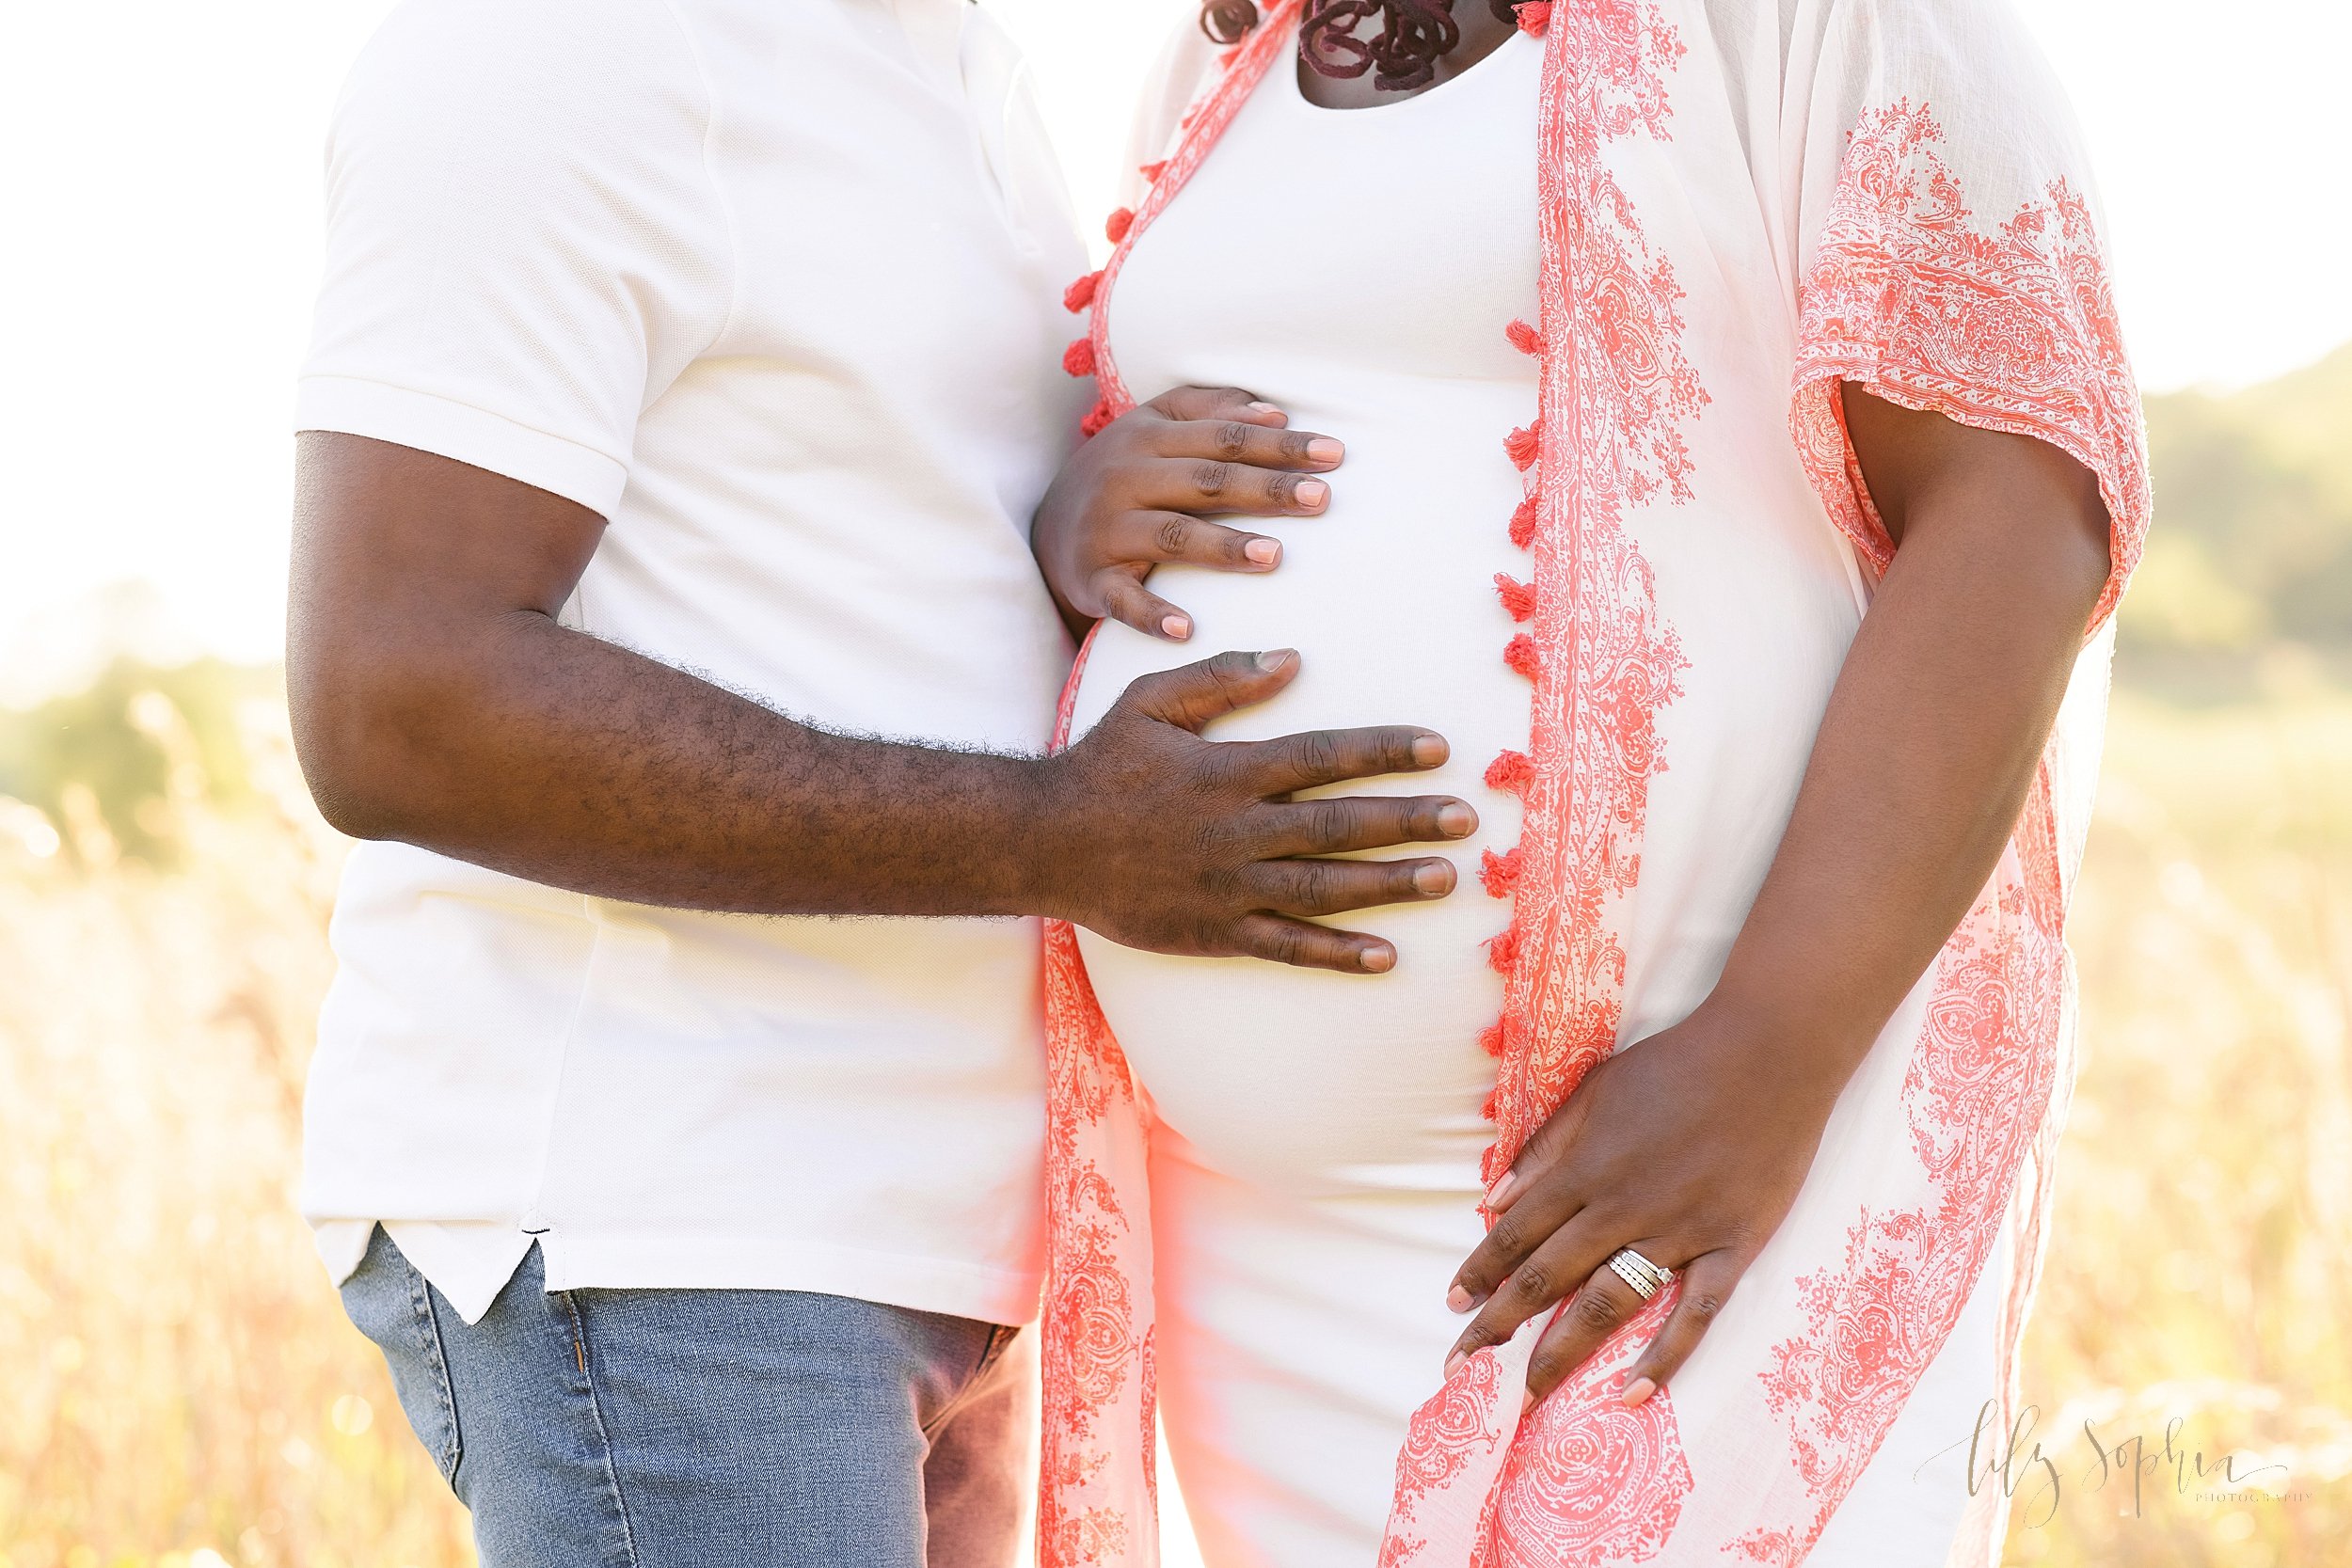  Close-up maternity photograph of an African-American woman’s belly as she and her husband place their hands on their child in utero taken near Atlanta in a field at sunset. 